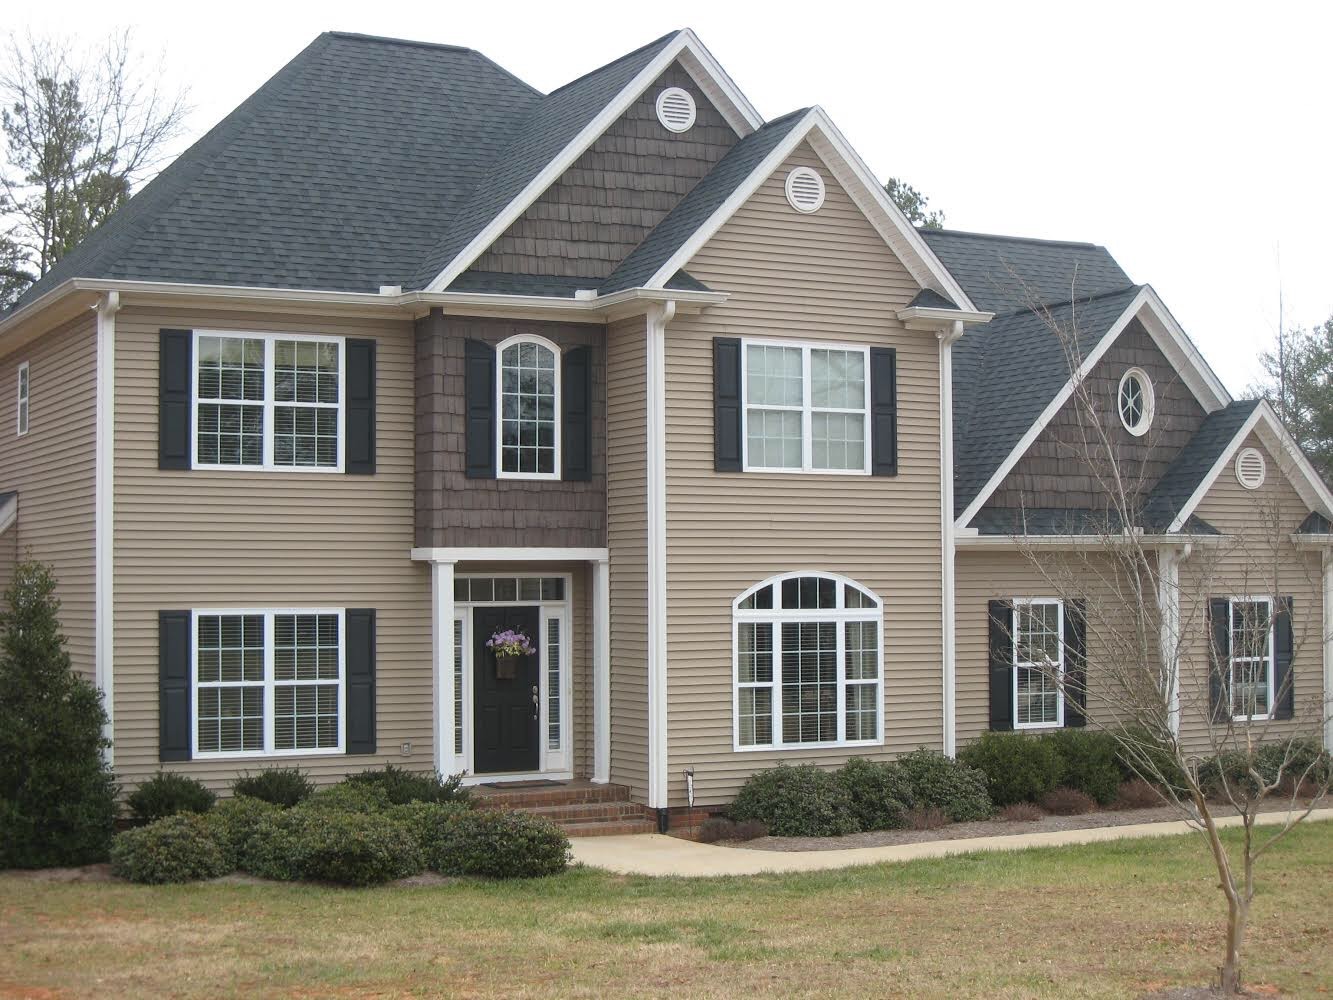 Serving the area since 1964, we are the top local choice for roofing repair and installation, siding and gutter installation, as well as window replacement in Greenville, Anderson, Spartanburg, Oconee, and Pickens counties!  Contact us today to schedule a consultation!